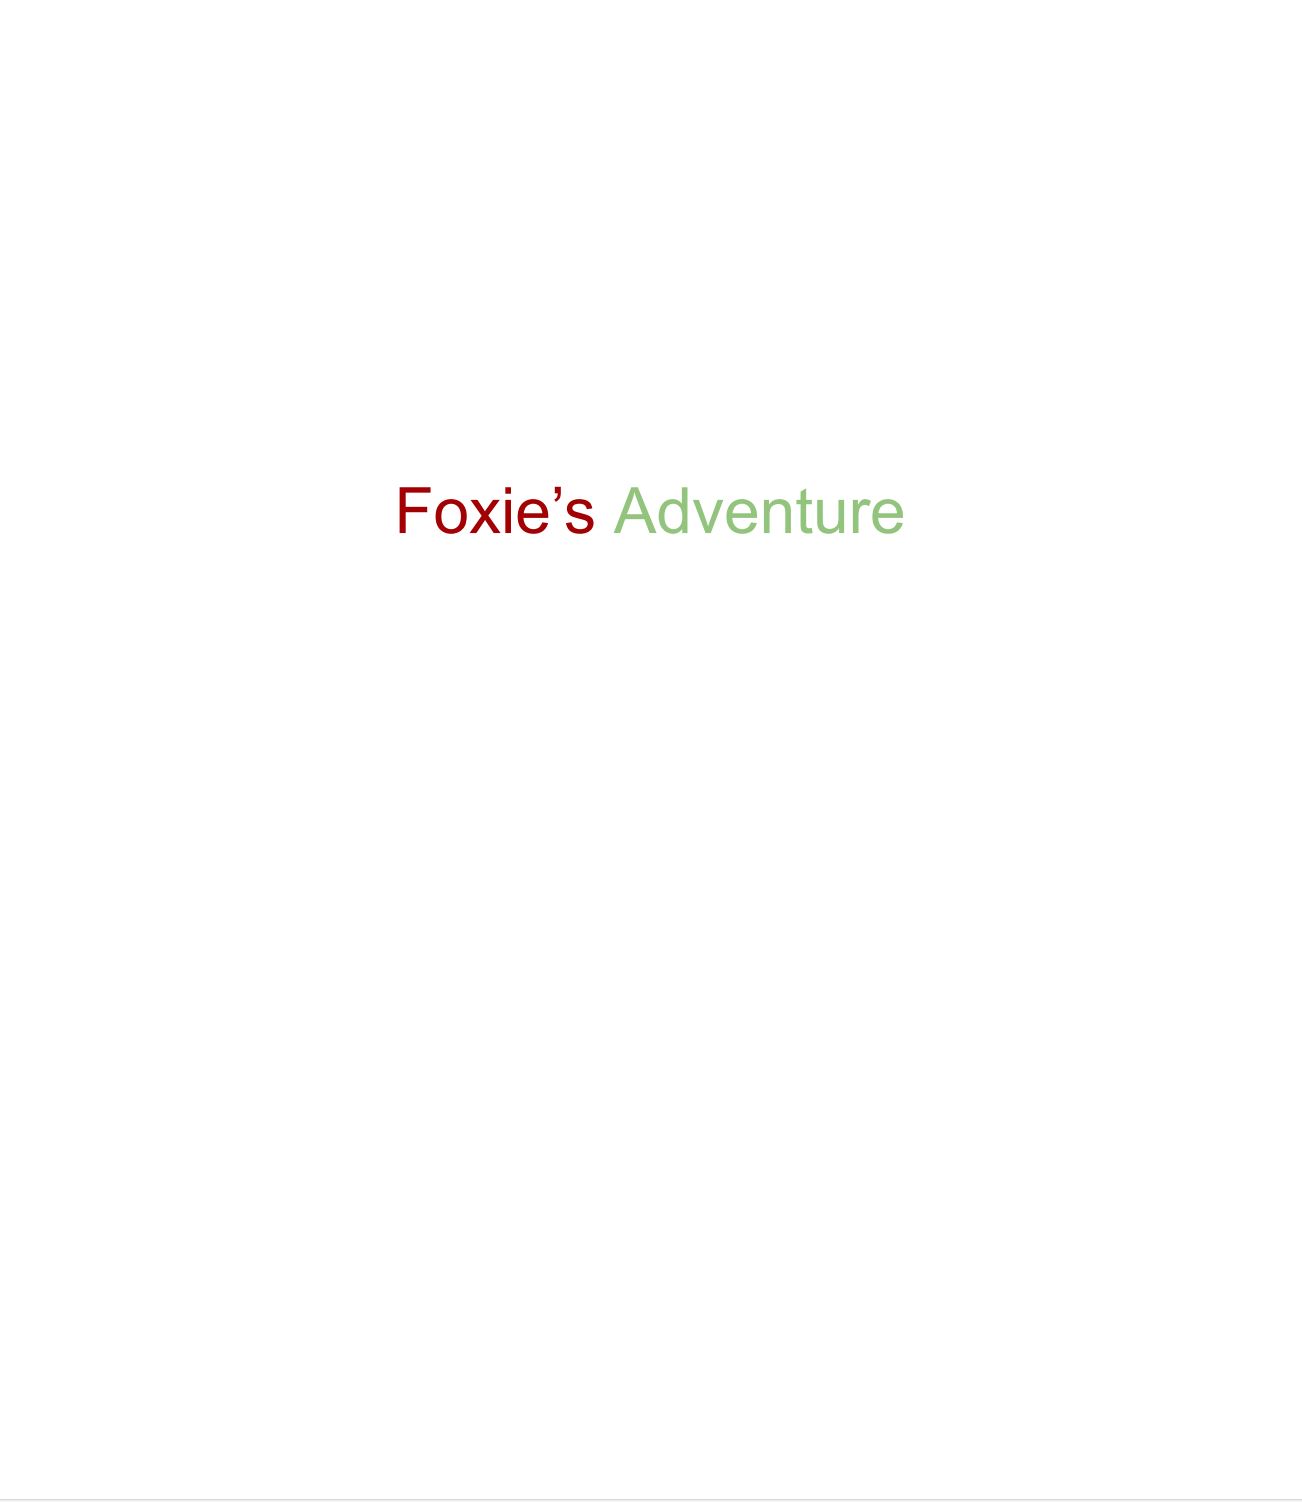 Foxie’s Adventure by Beatrice R.